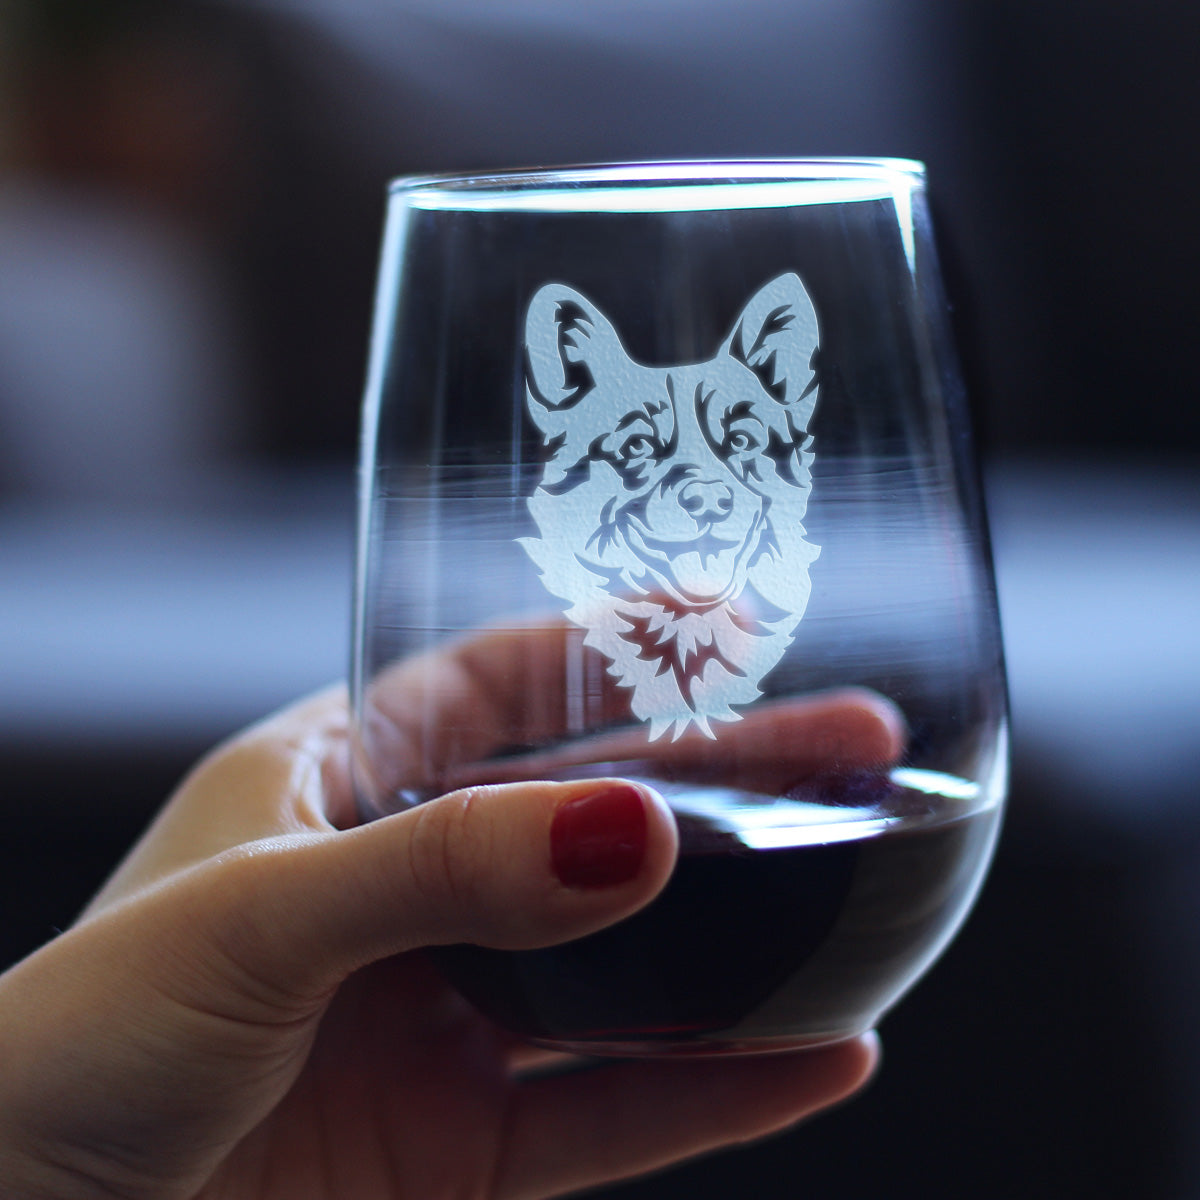 Corgi Face Stemless Wine Glass - Cute Dog Themed Decor and Gifts for Moms &amp; Dads of Welsh Corgies - Large 17 Oz